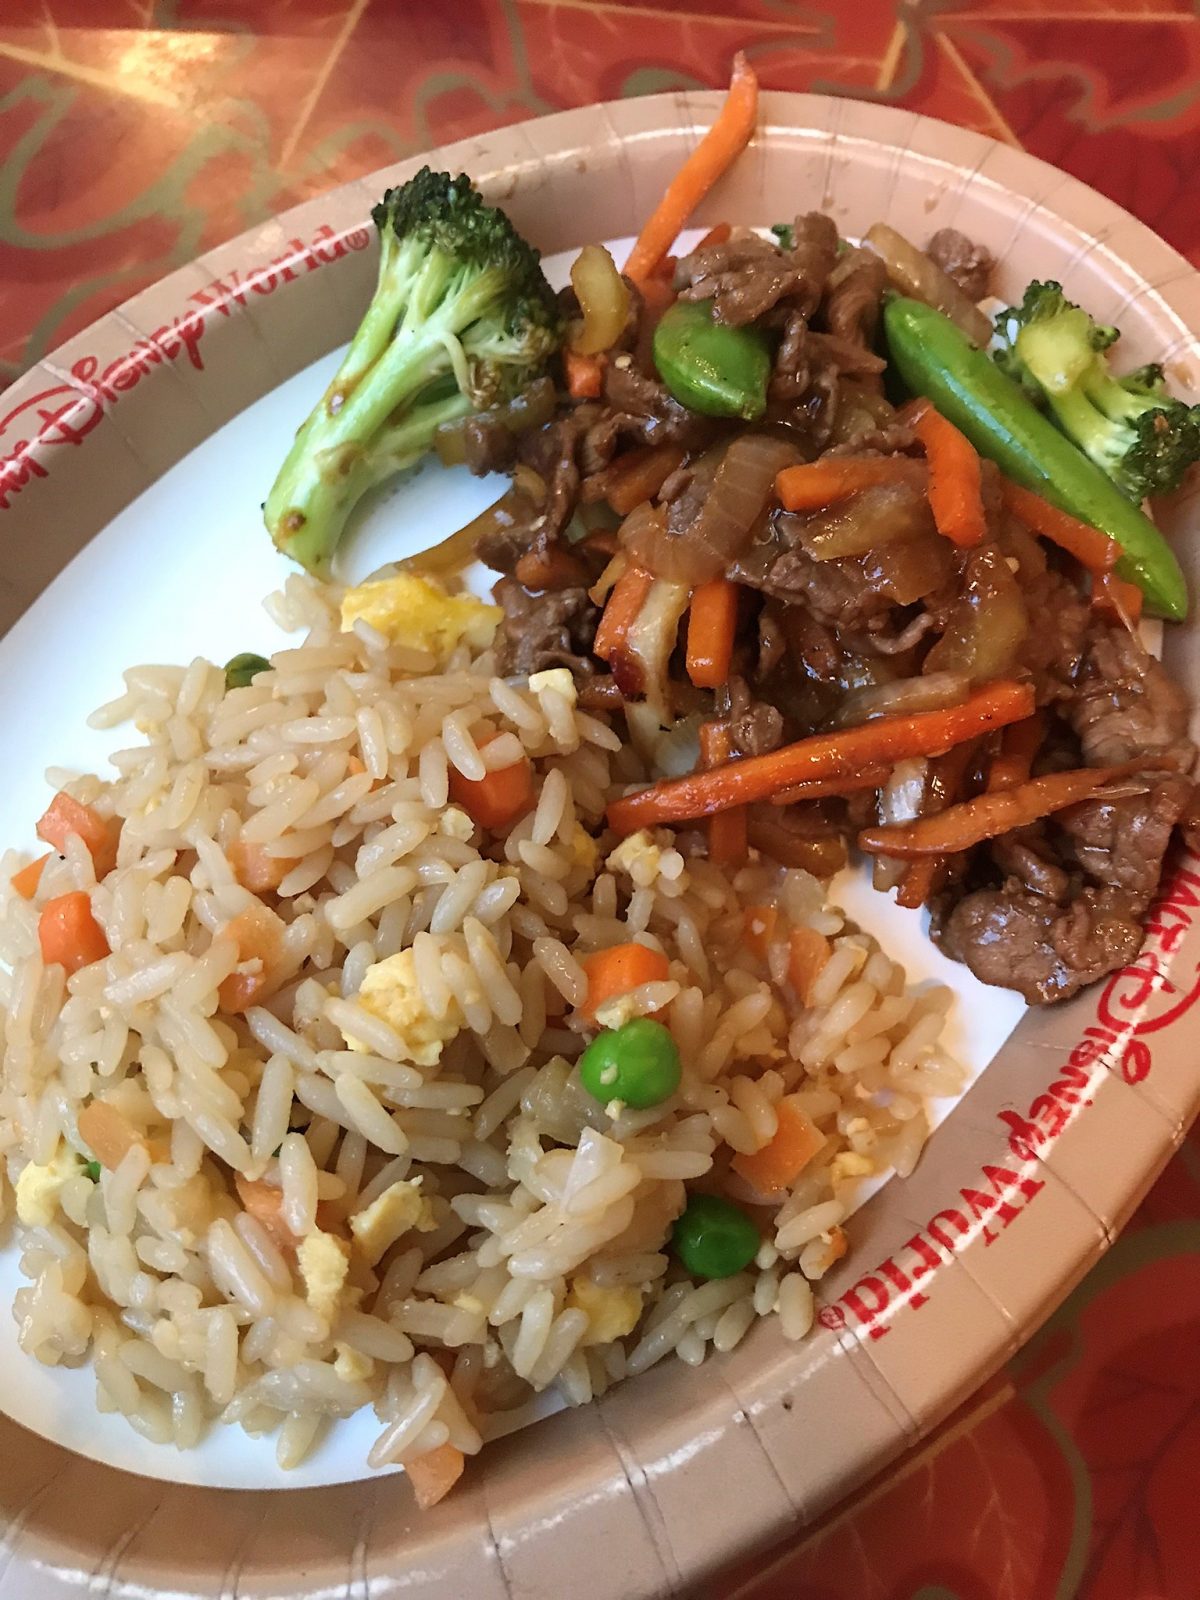 kids' portion of the Mongolian Beef